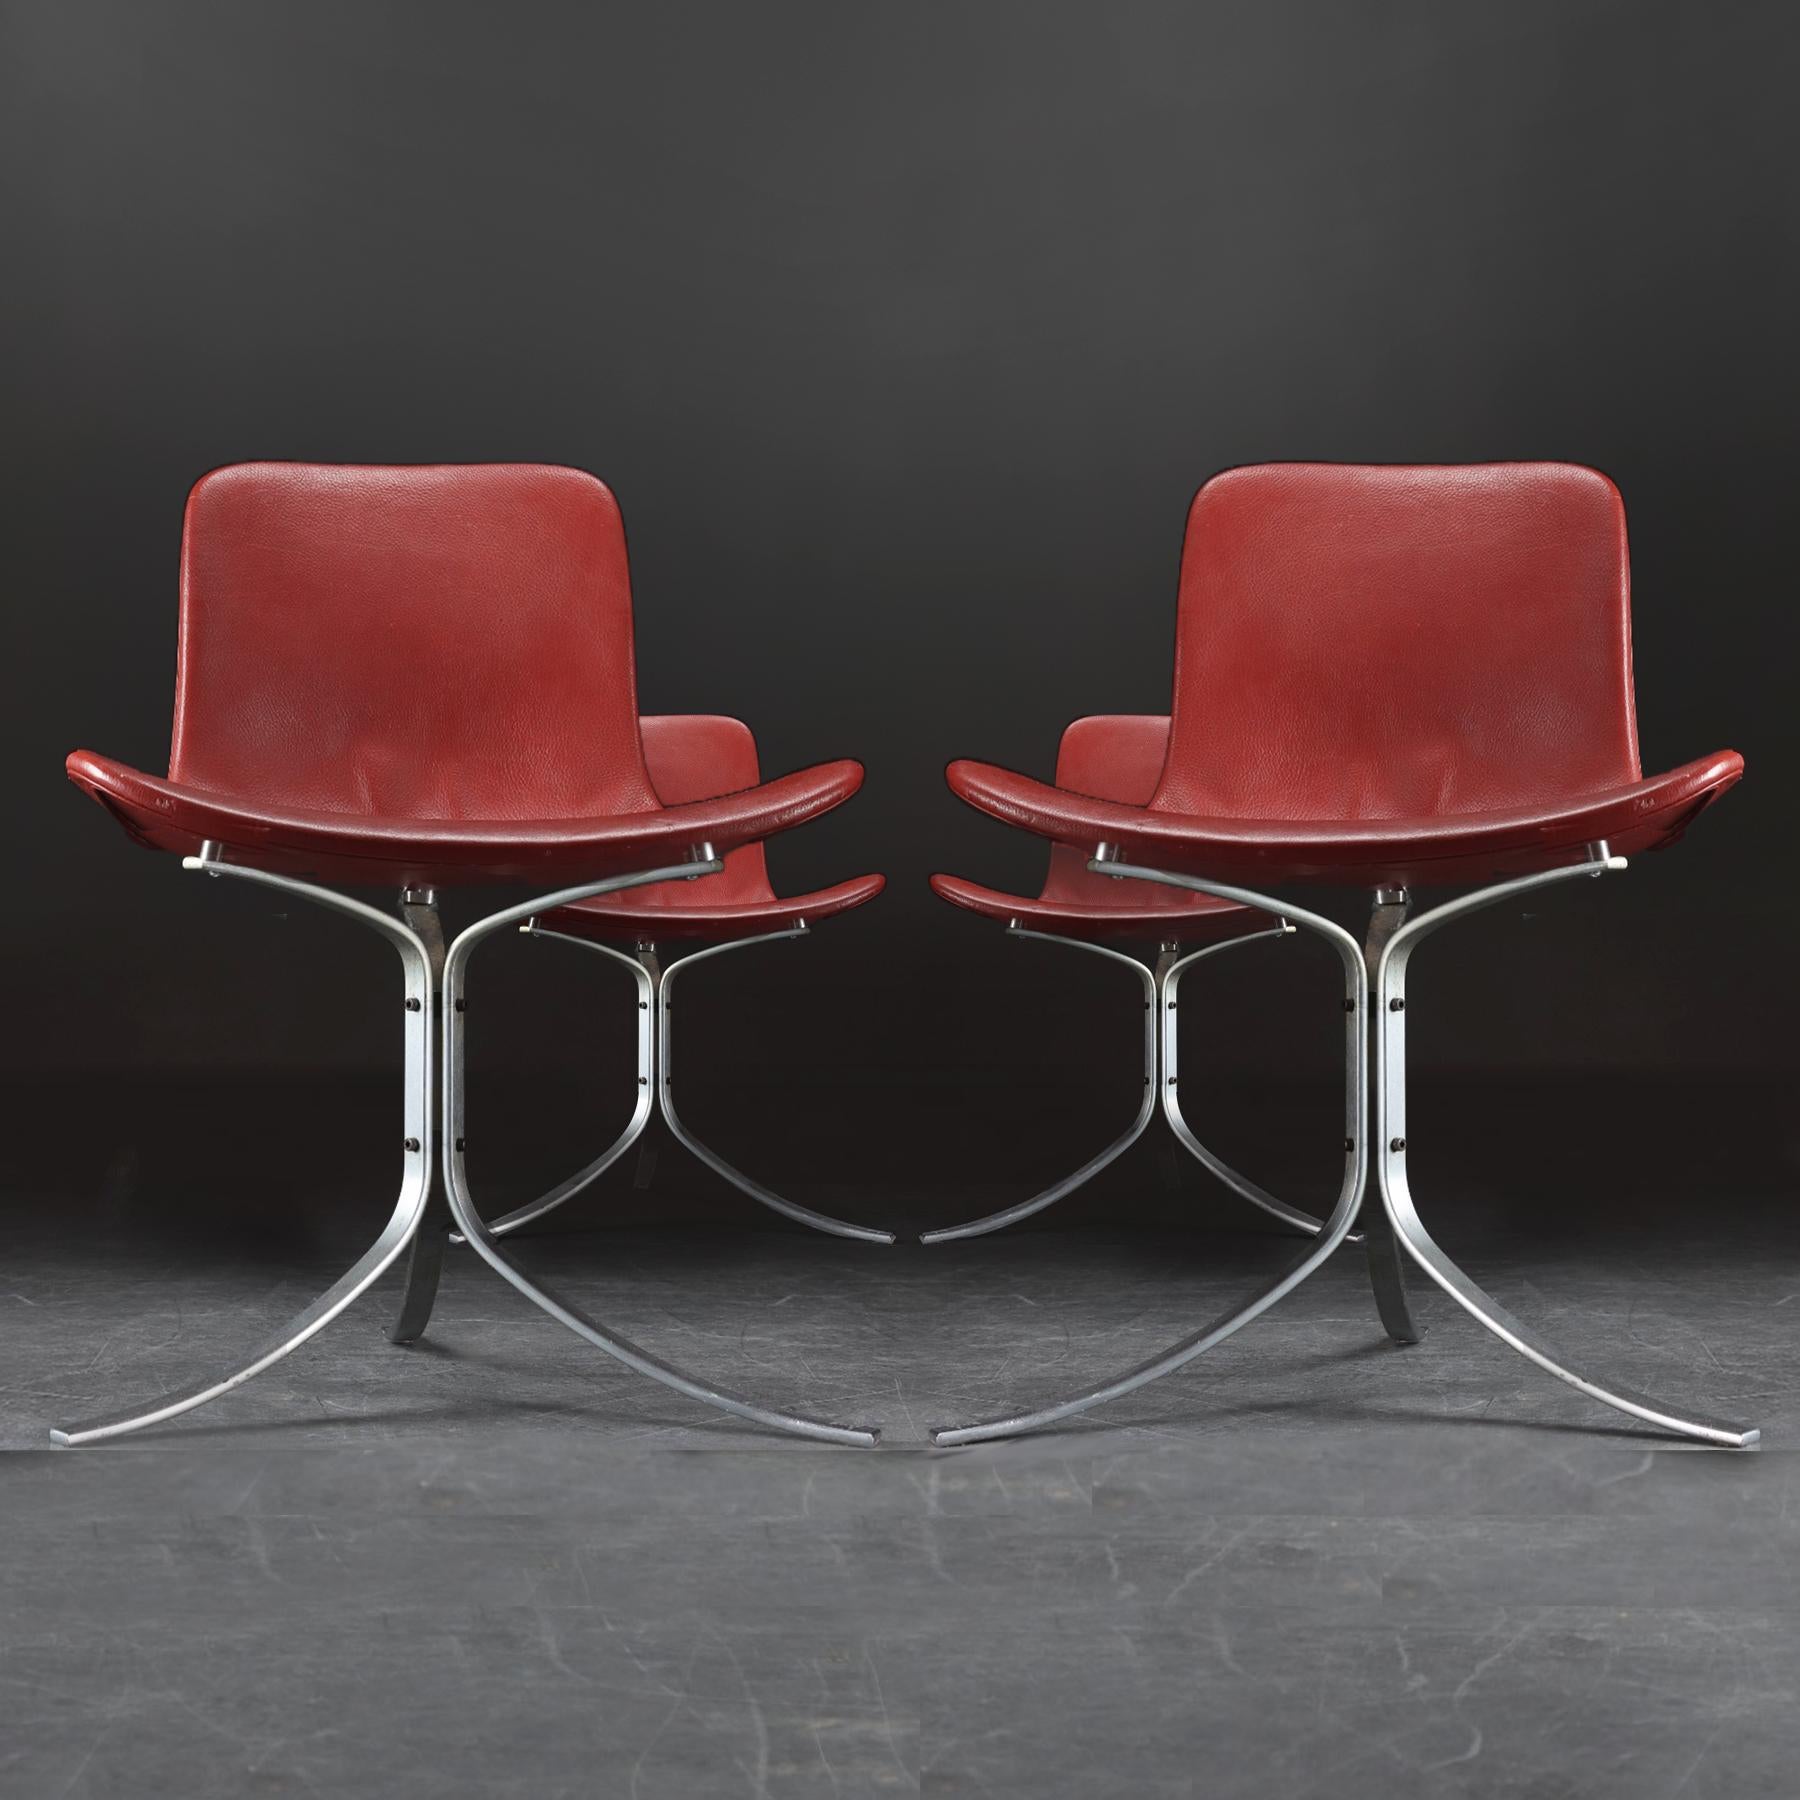 A set of 4 Danish Mid Century vintage leather and steel PK9 chairs designed by Poul Kjaerholm for E. Kold Christensen with additional bespoke optional seat height extensions.

These are a beautifully crafted set of chairs with a simple but striking